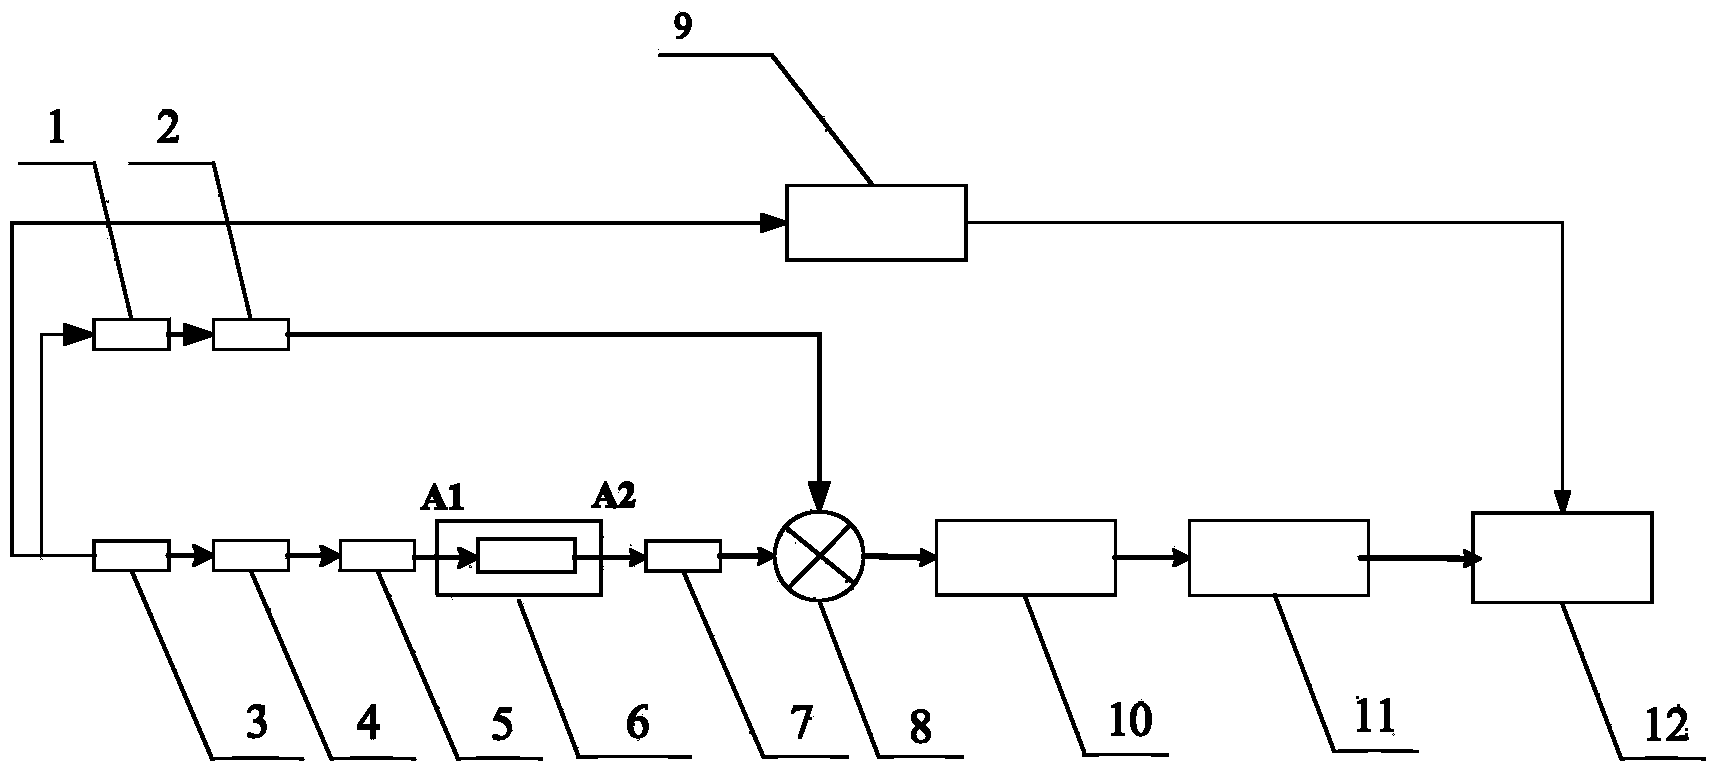 Attenuation measurement device for waveguide system